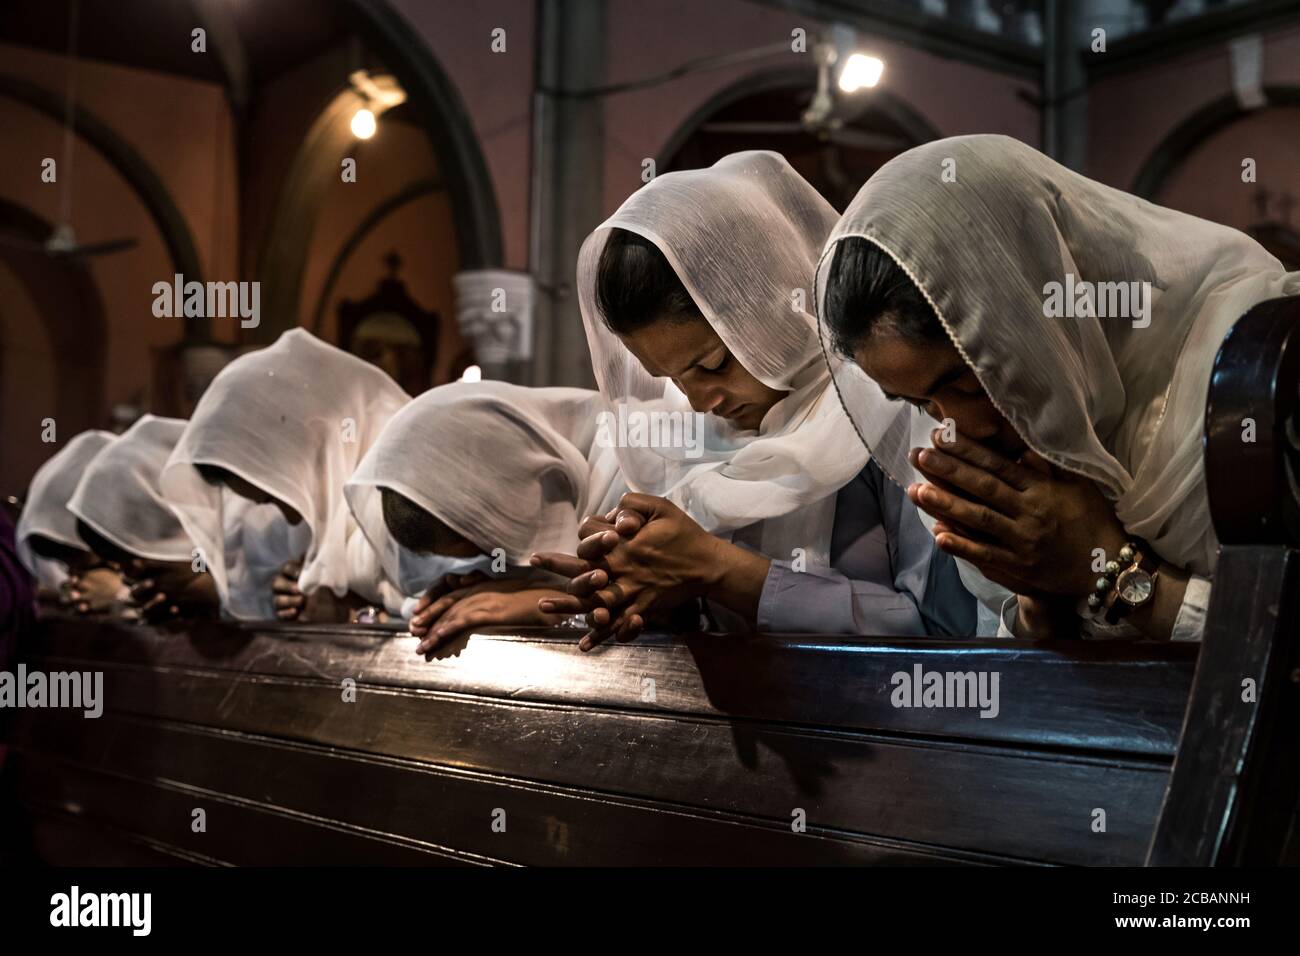 Believers christians during the Friday light fair service in the Sacred Heart Cathedral in Lahore in Pakistan. In 2015, the parish was attacked in the cathedral during a bomb attack where numerous victims were reported. Stock Photo